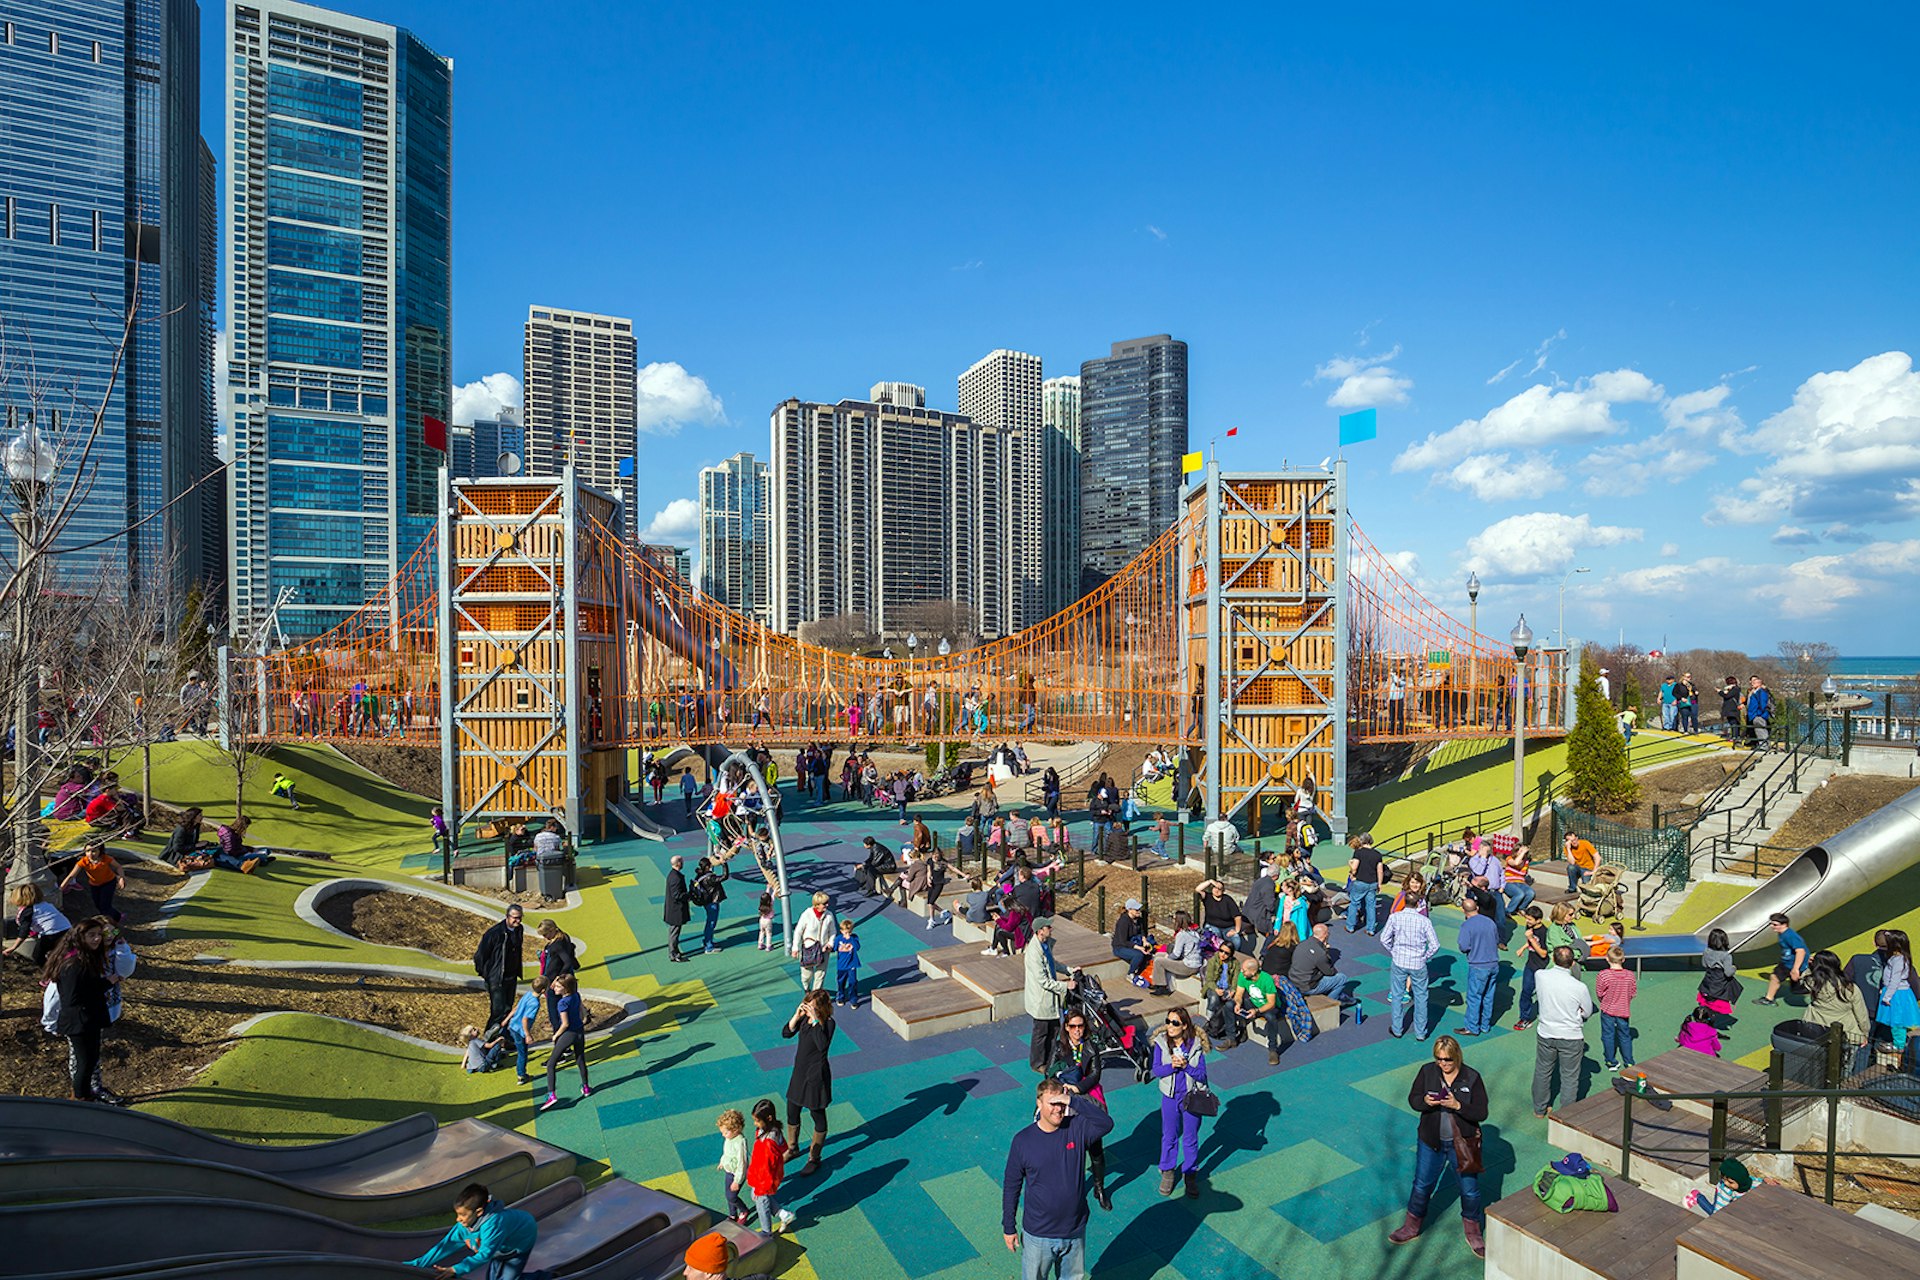 Families gather on the colorful playground at Maggie Daley Park in downtown Chicago